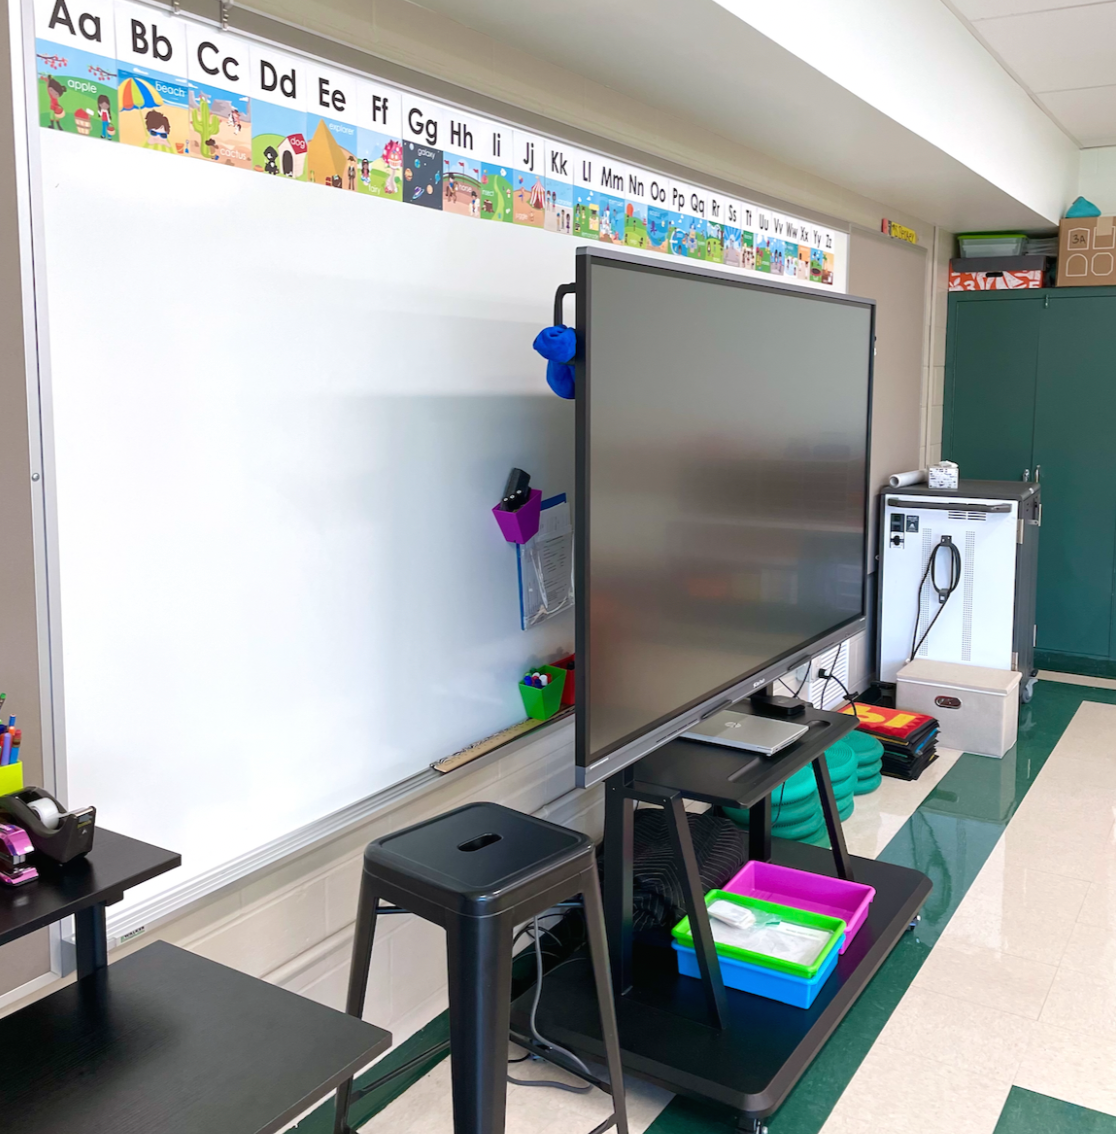 First grade classroom setup, this photo features an alphabet line, standing desk and clear touch panel